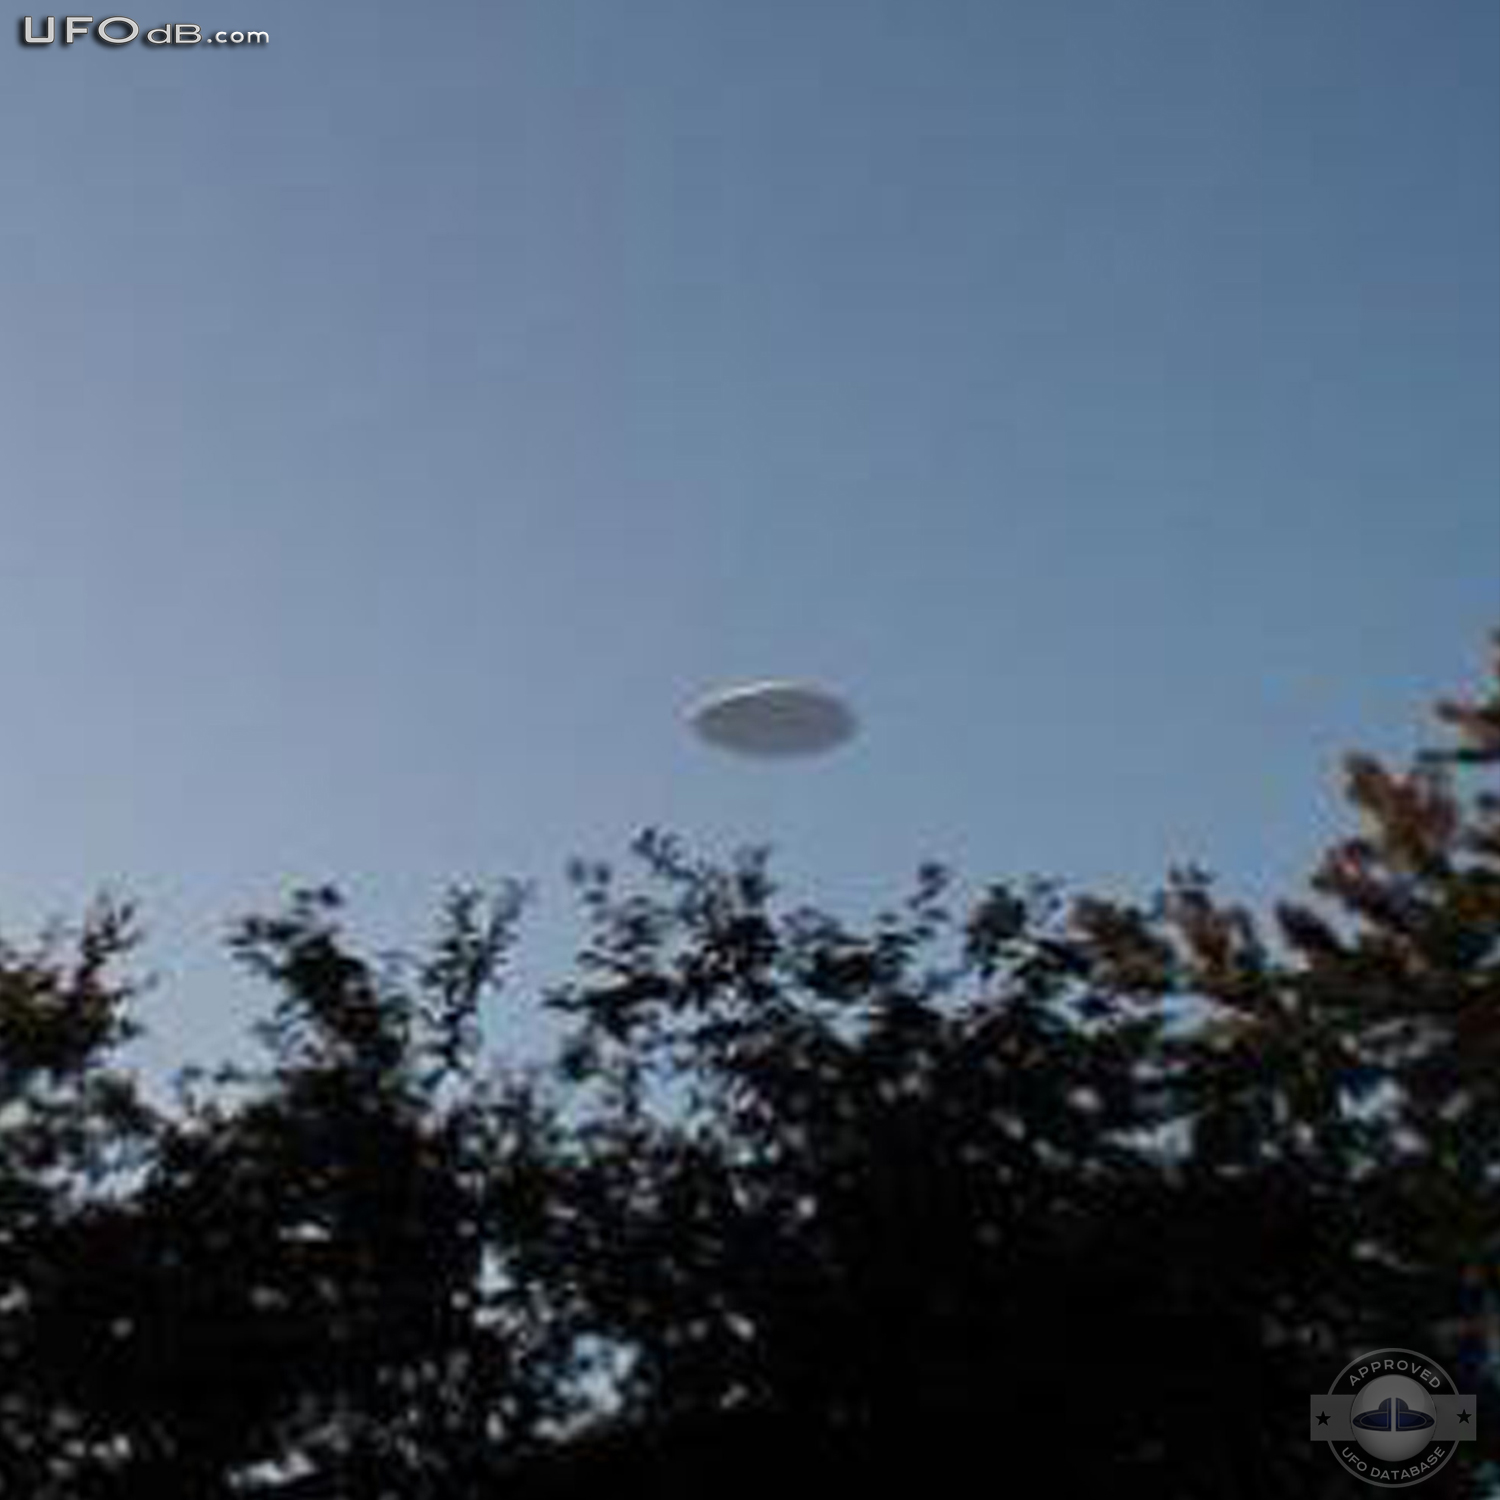 In Vestal New York a witness sees a UFO as large as a Football Stadium UFO Picture #363-1